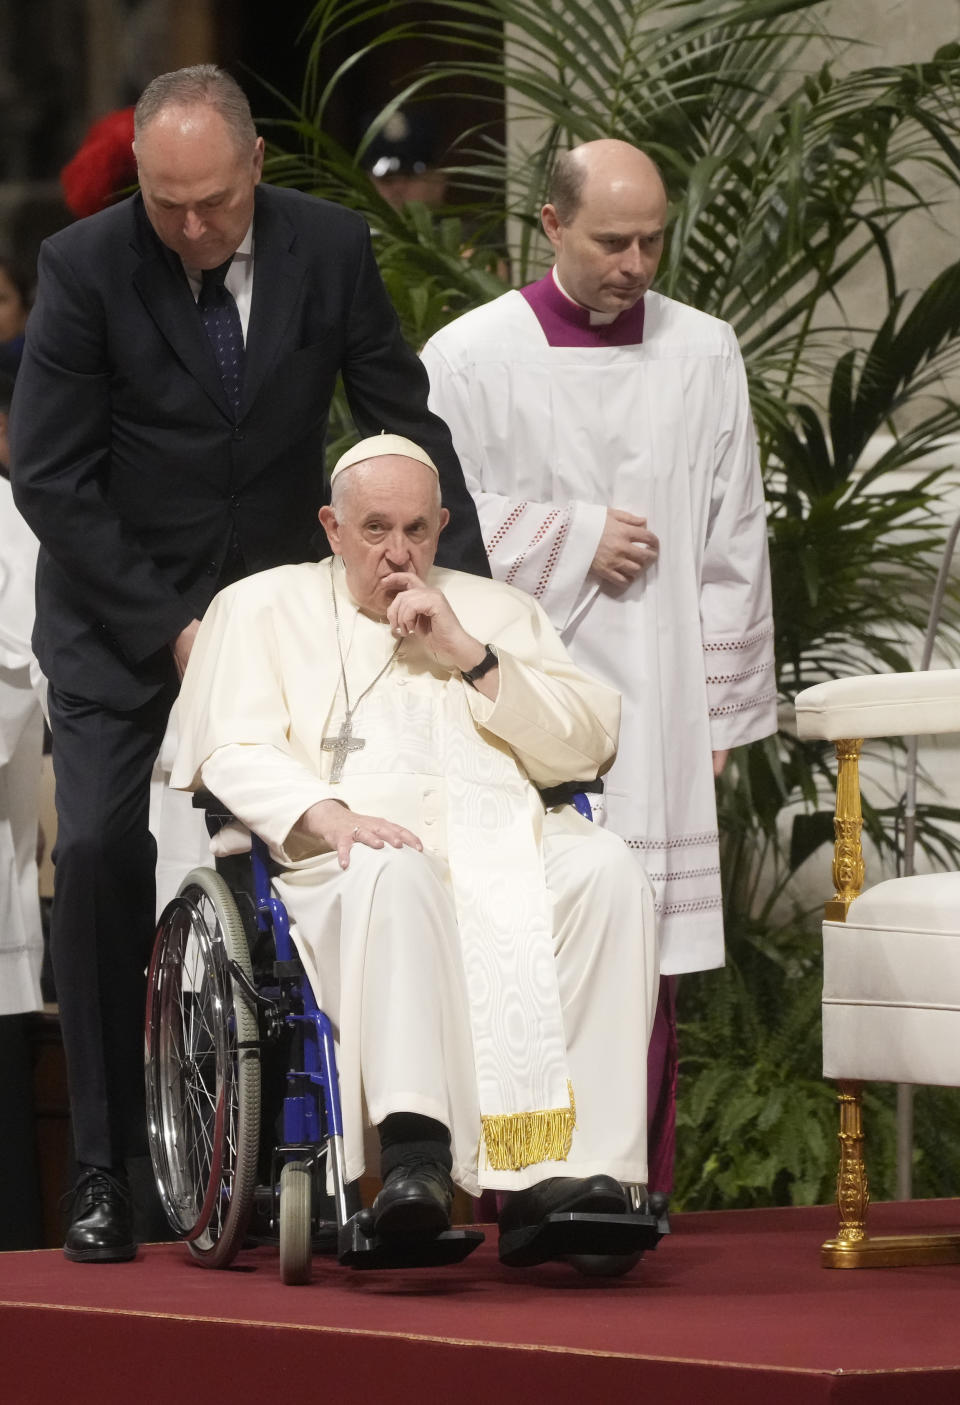 Pope Francis arrives in St. Peter's Basilica at The Vatican to preside over a mass in honor of our lady of Guadalupe, Monday, Dec. 12, 2022. (AP Photo/Gregorio Borgia)